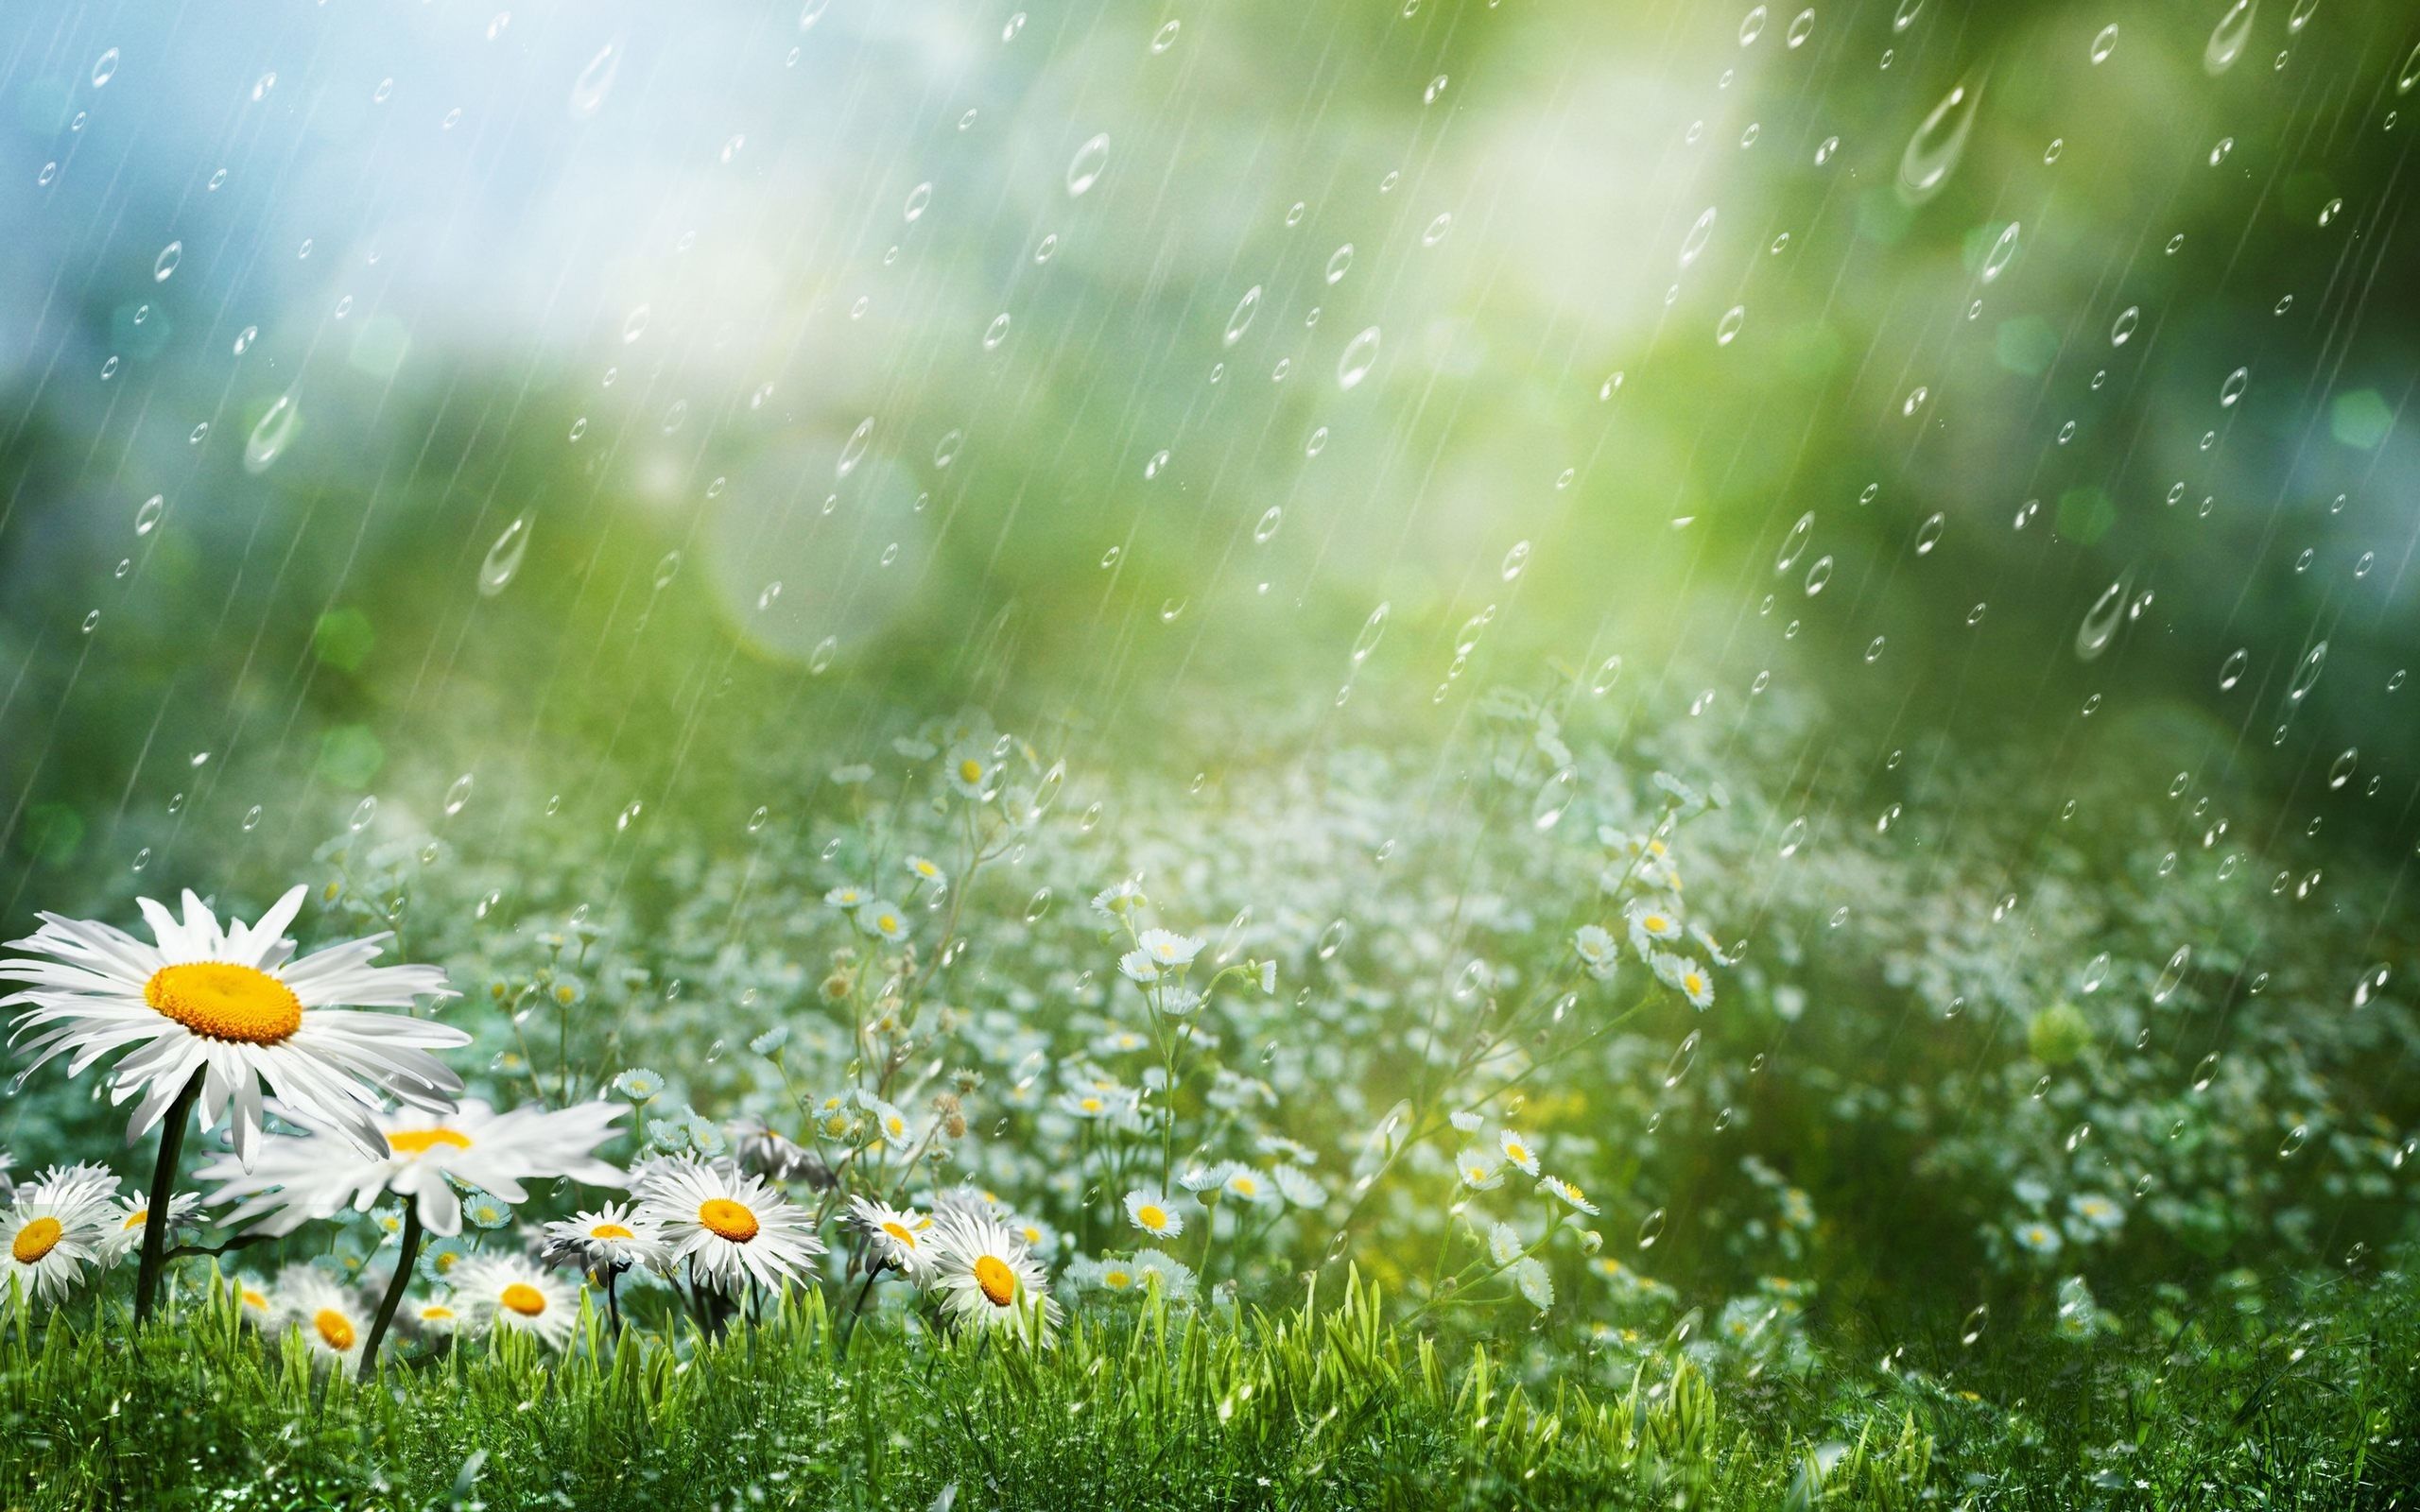 Rainy Spring Wallpapers - Wallpaper Cave